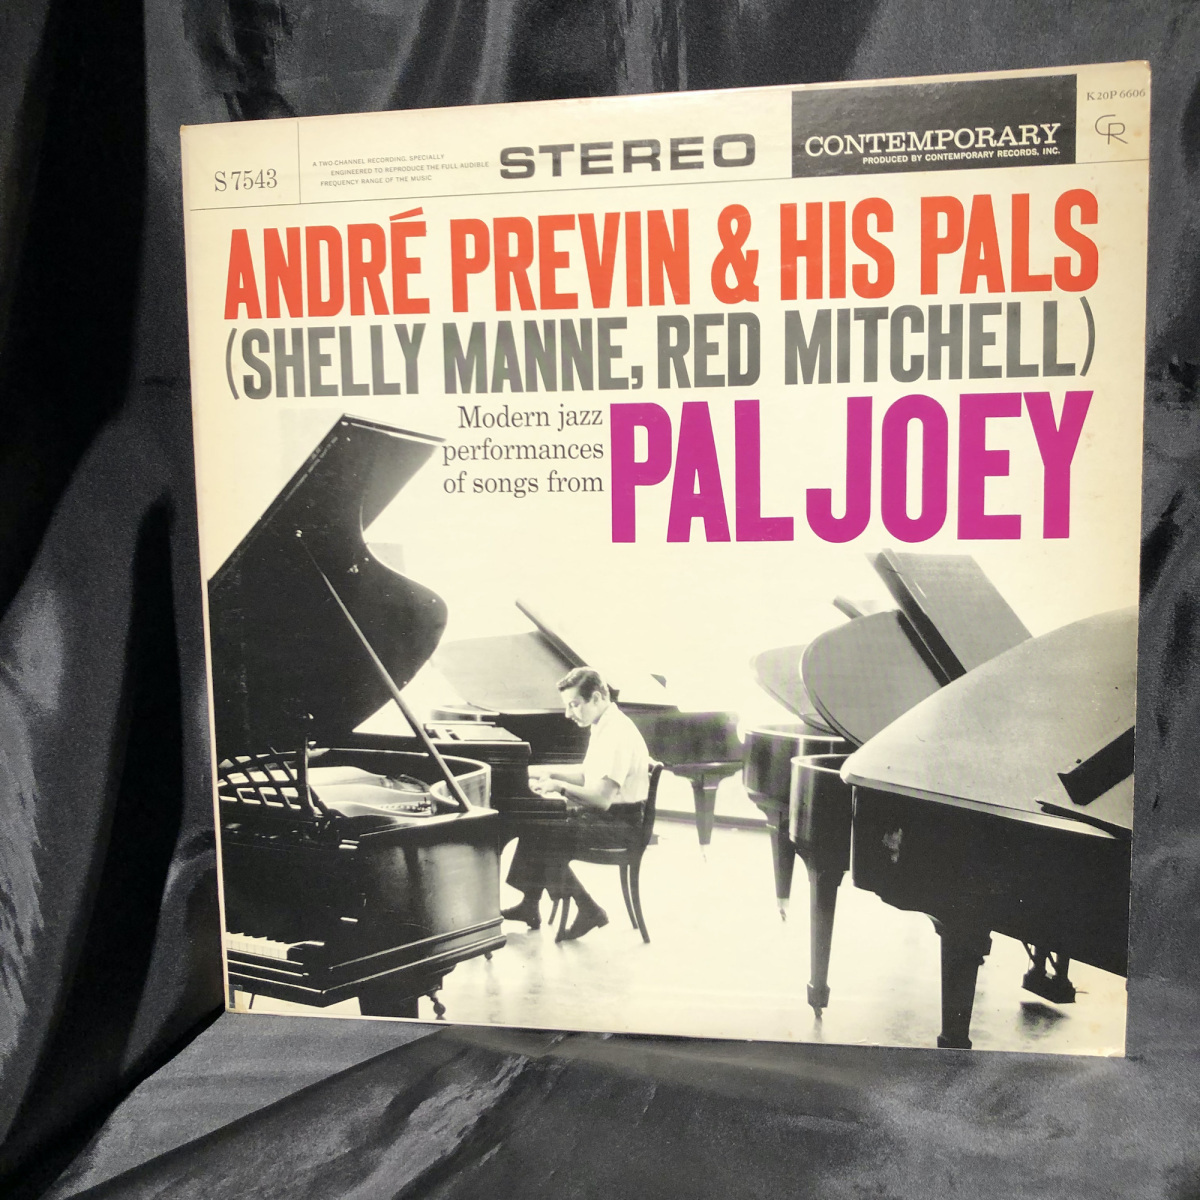 PAL JOEY/ANDRE PREVIN AND HIS PALS LP CONTEMPORARY RECORDS・KING RECORD_画像1